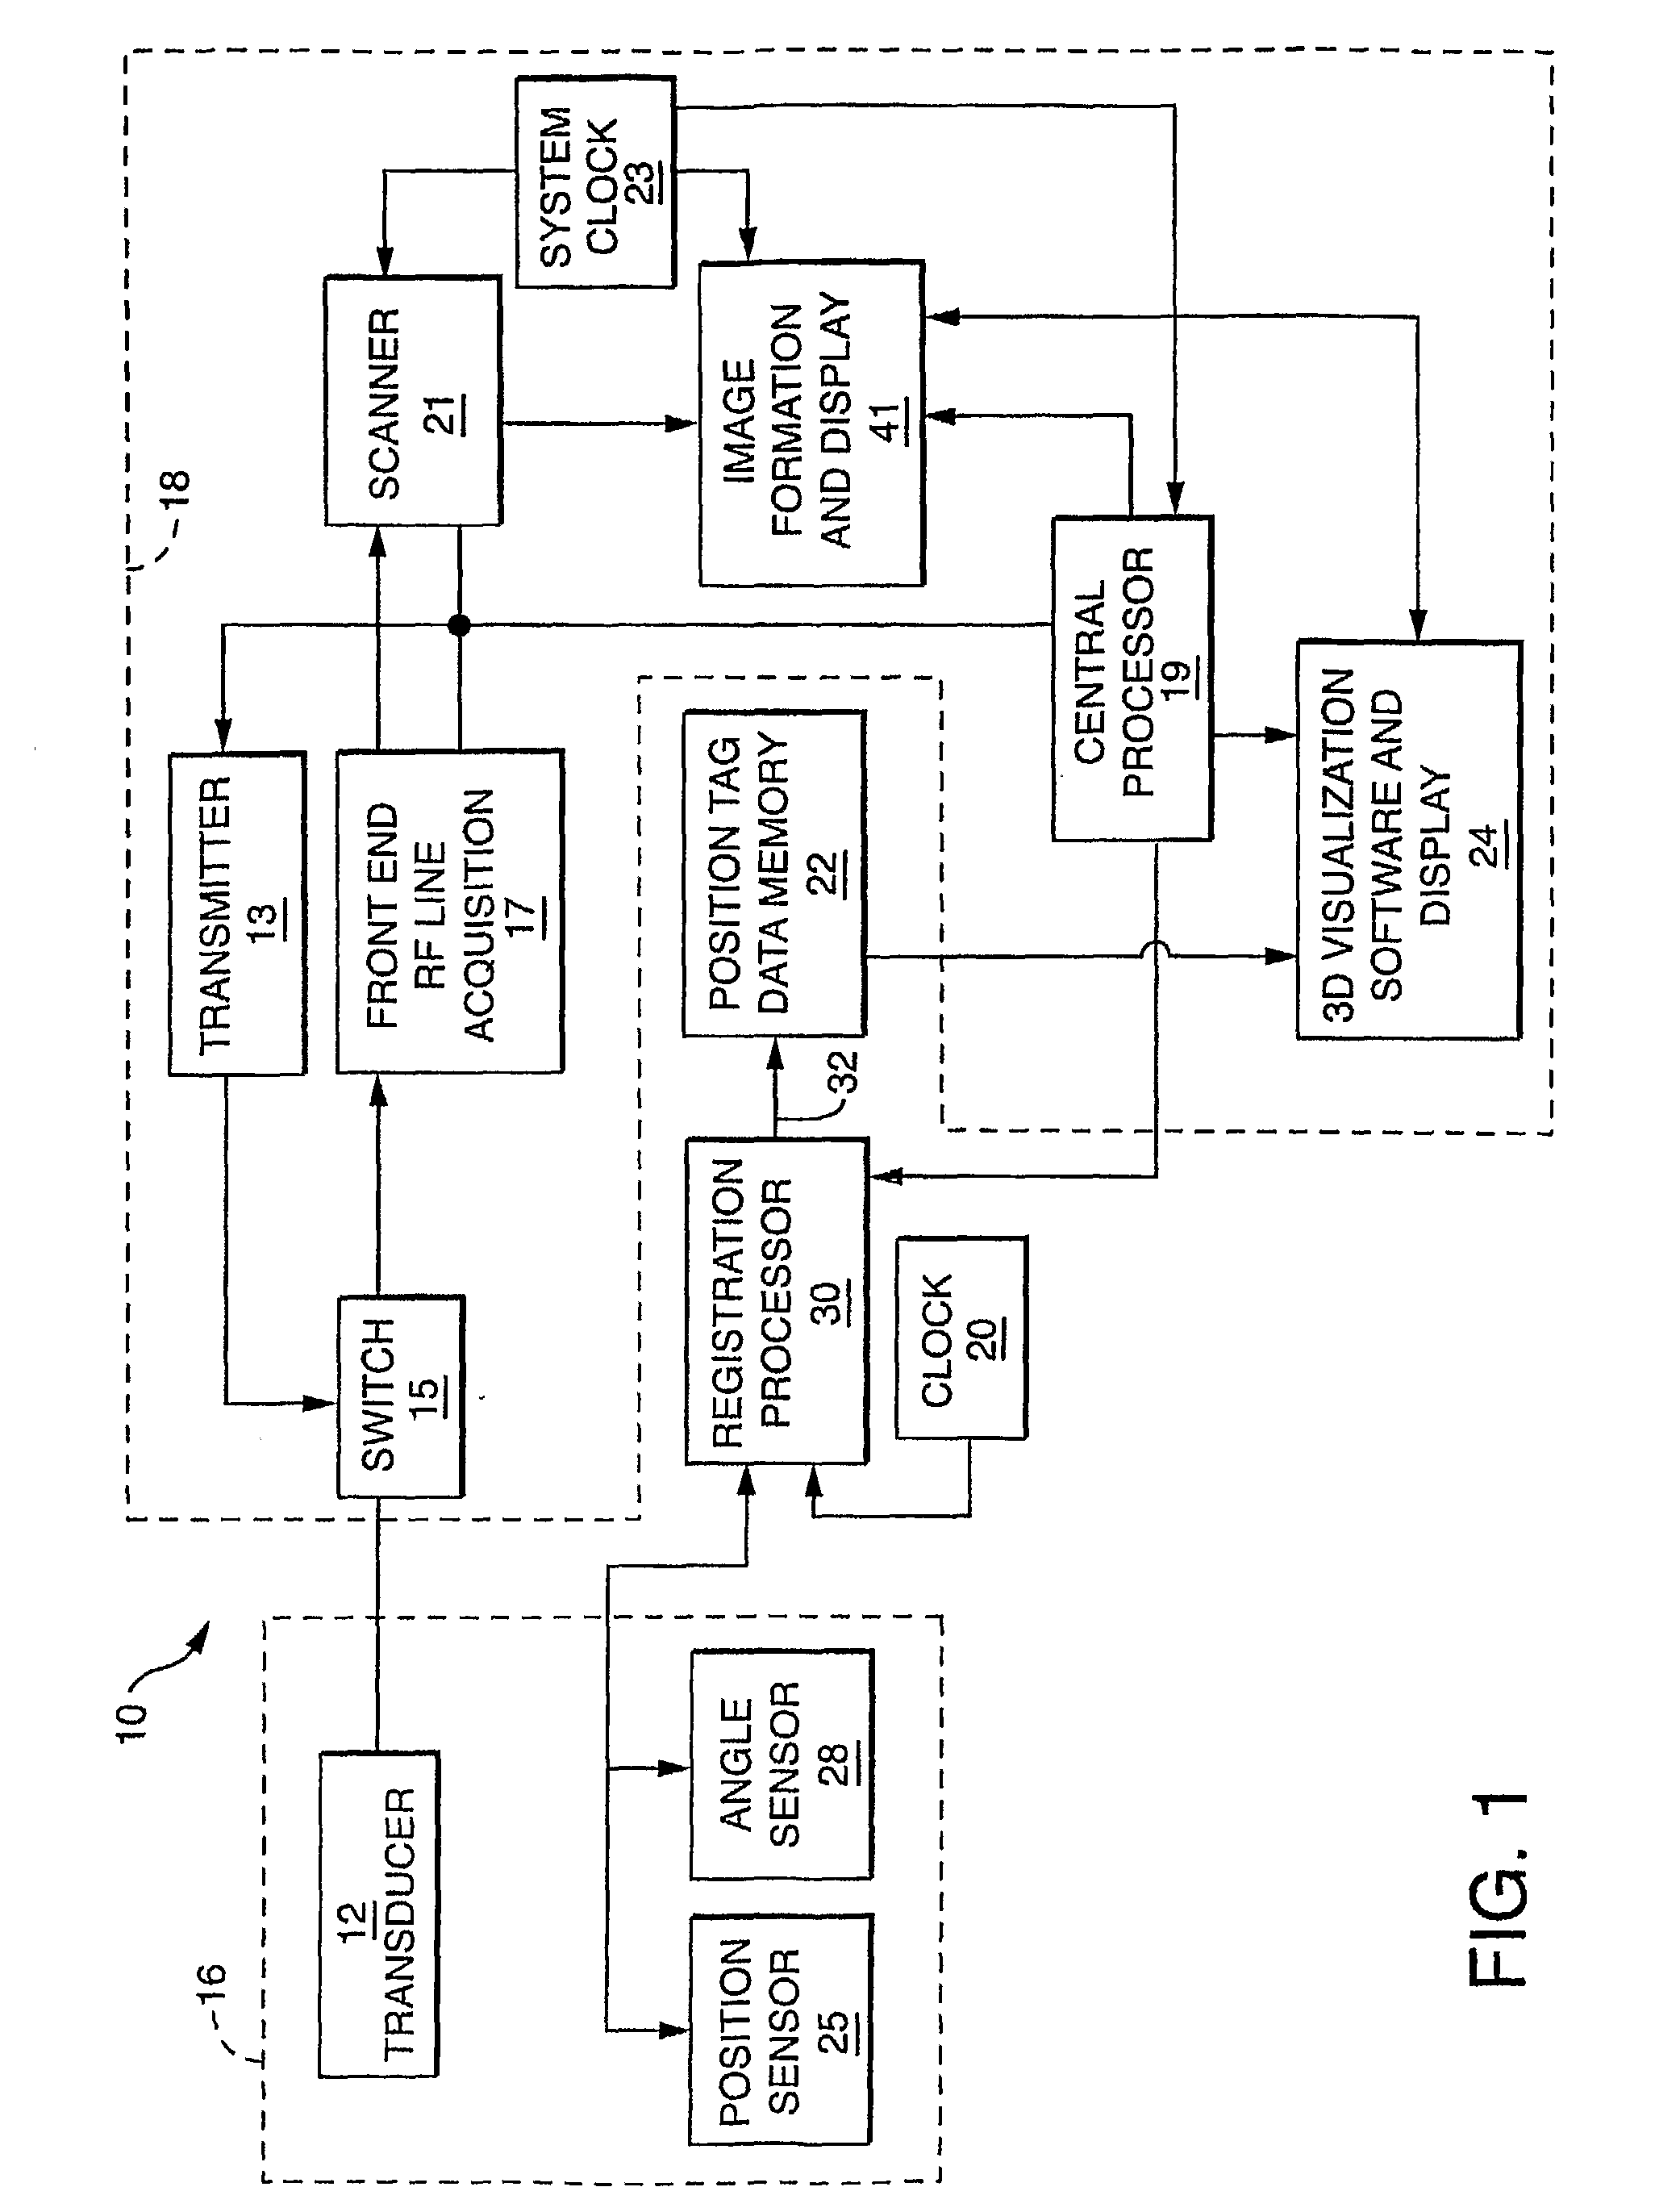 Free-hand three-dimensional ultrasound diagnostic imaging with position and angle determination sensors